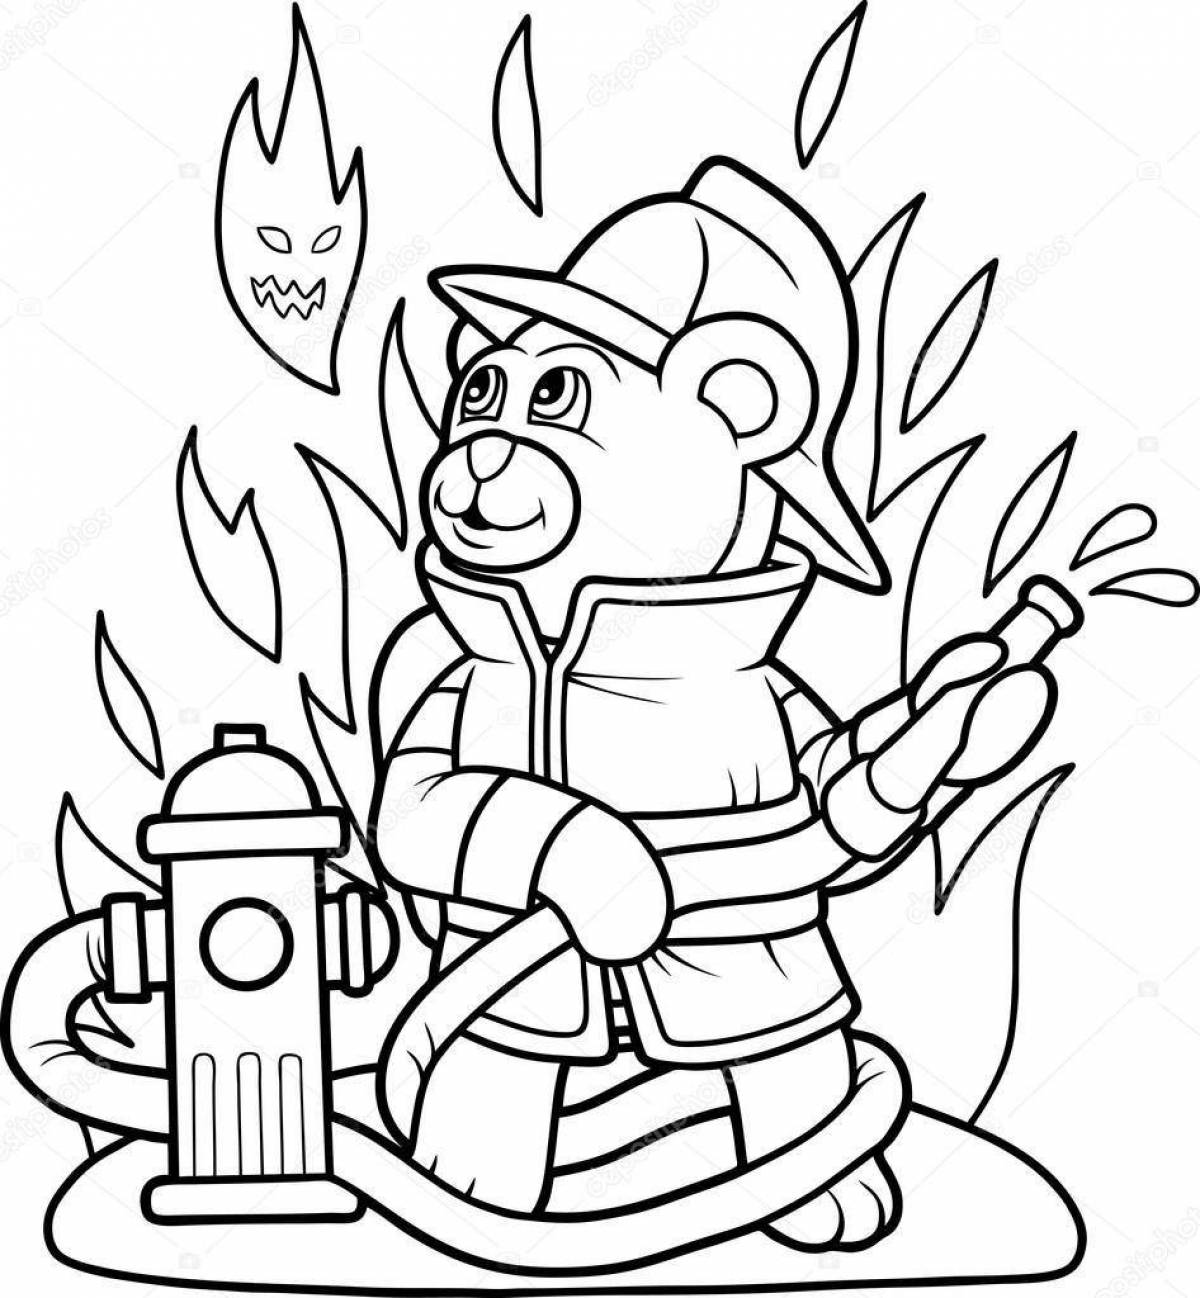 Burning fire coloring page